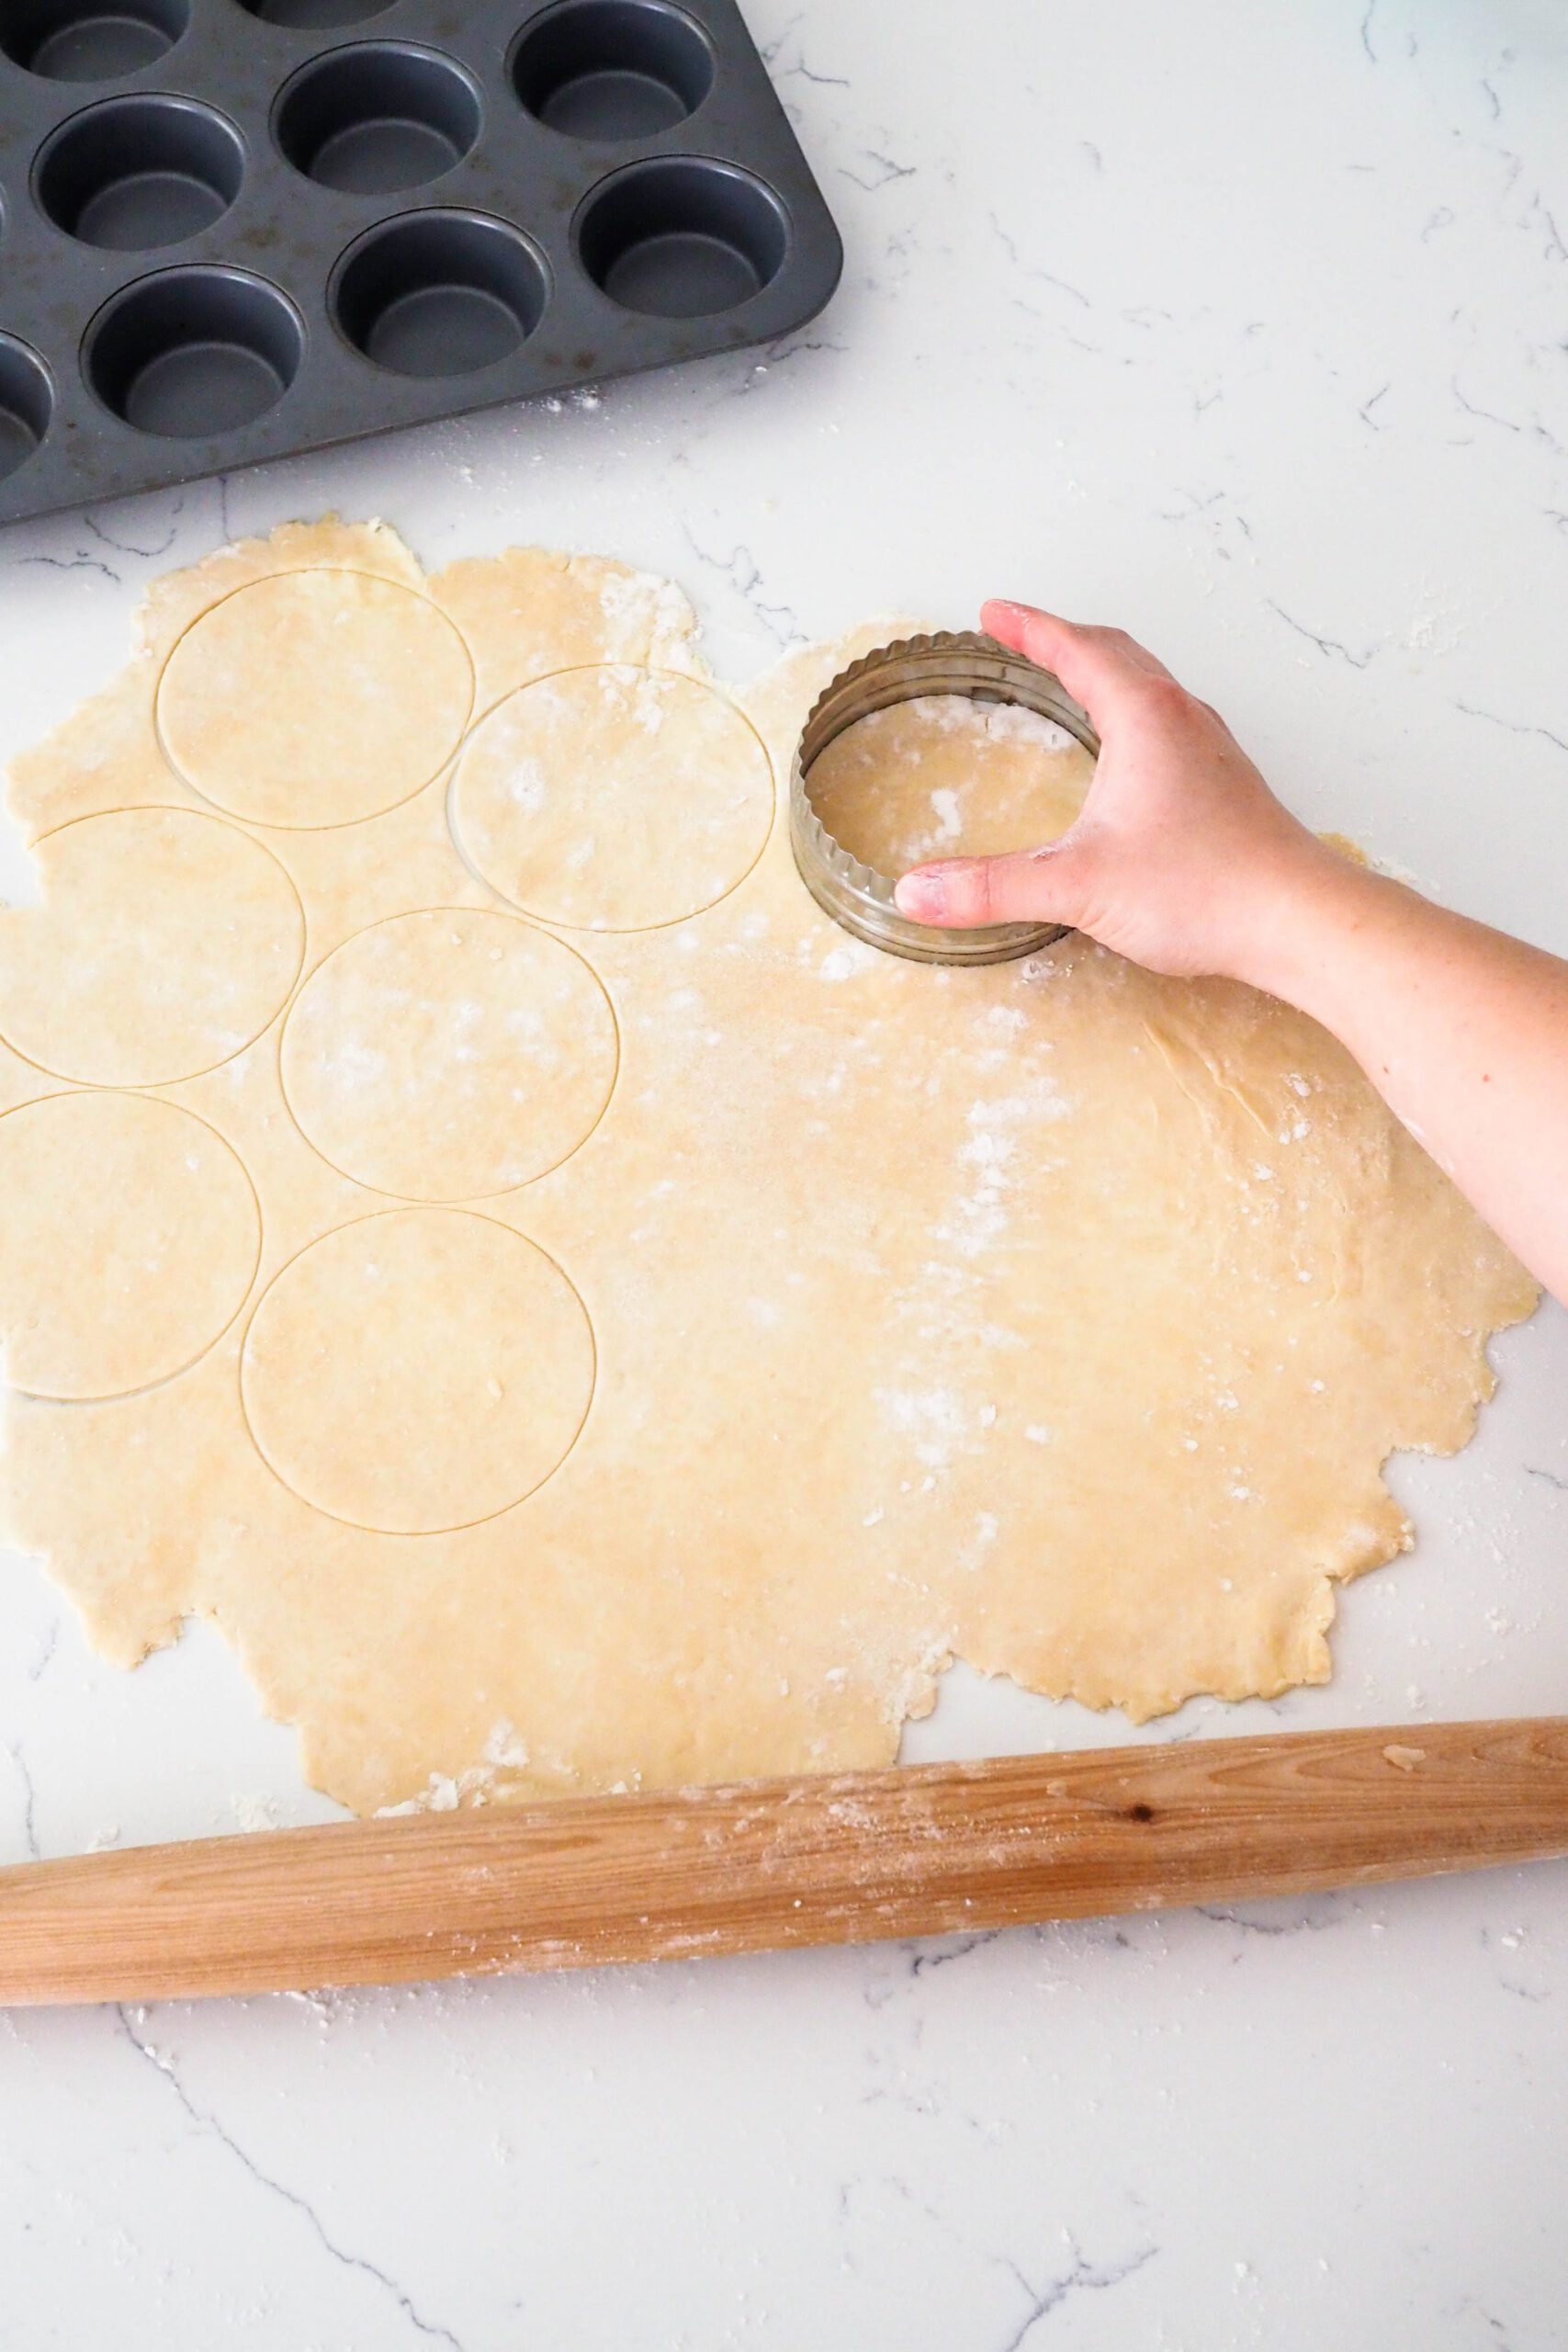 A hand cuts a 4" round in rolled out pie dough.